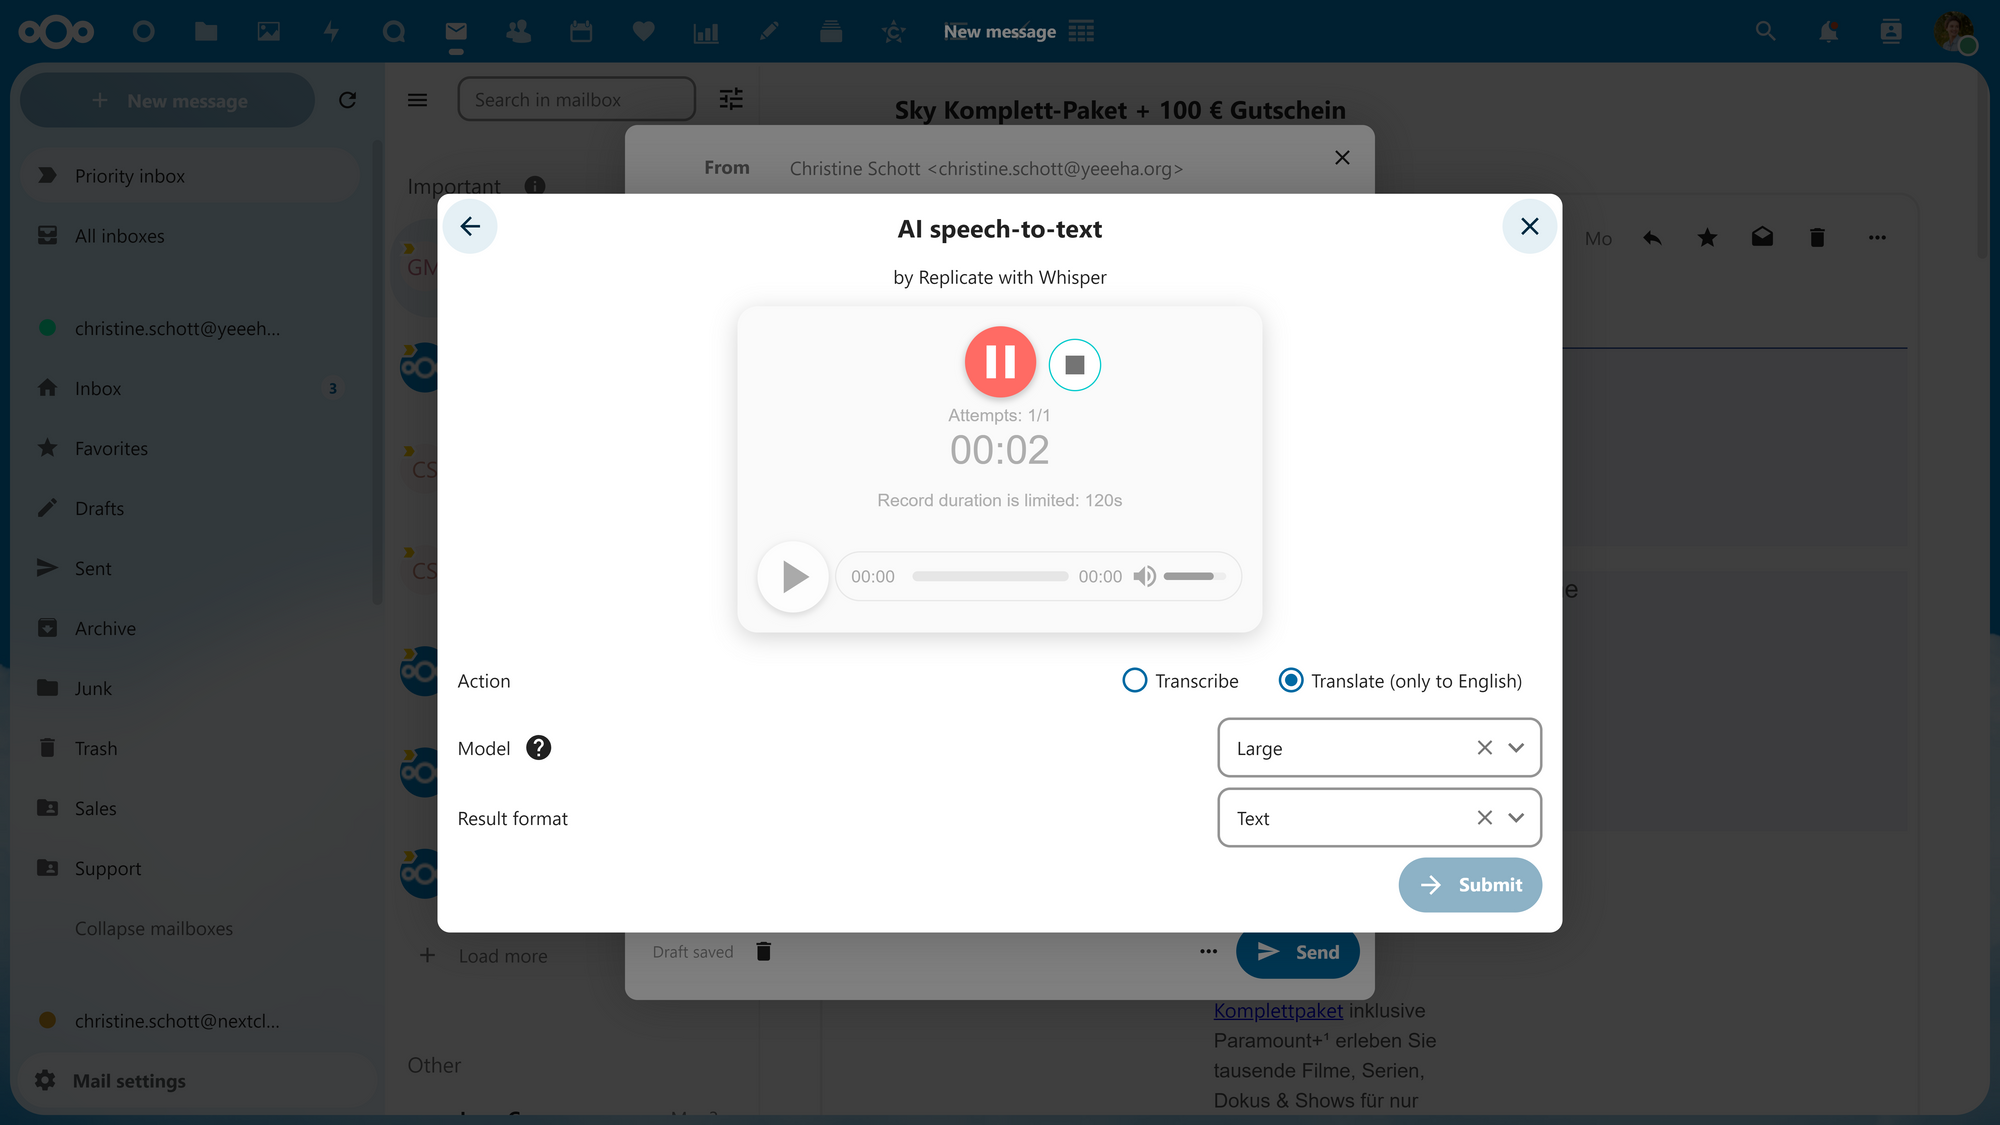 A dialog titled "AI speech-to-text" with an audio-recording button and "Transcribe/Translate", "Model", "Result format" options.